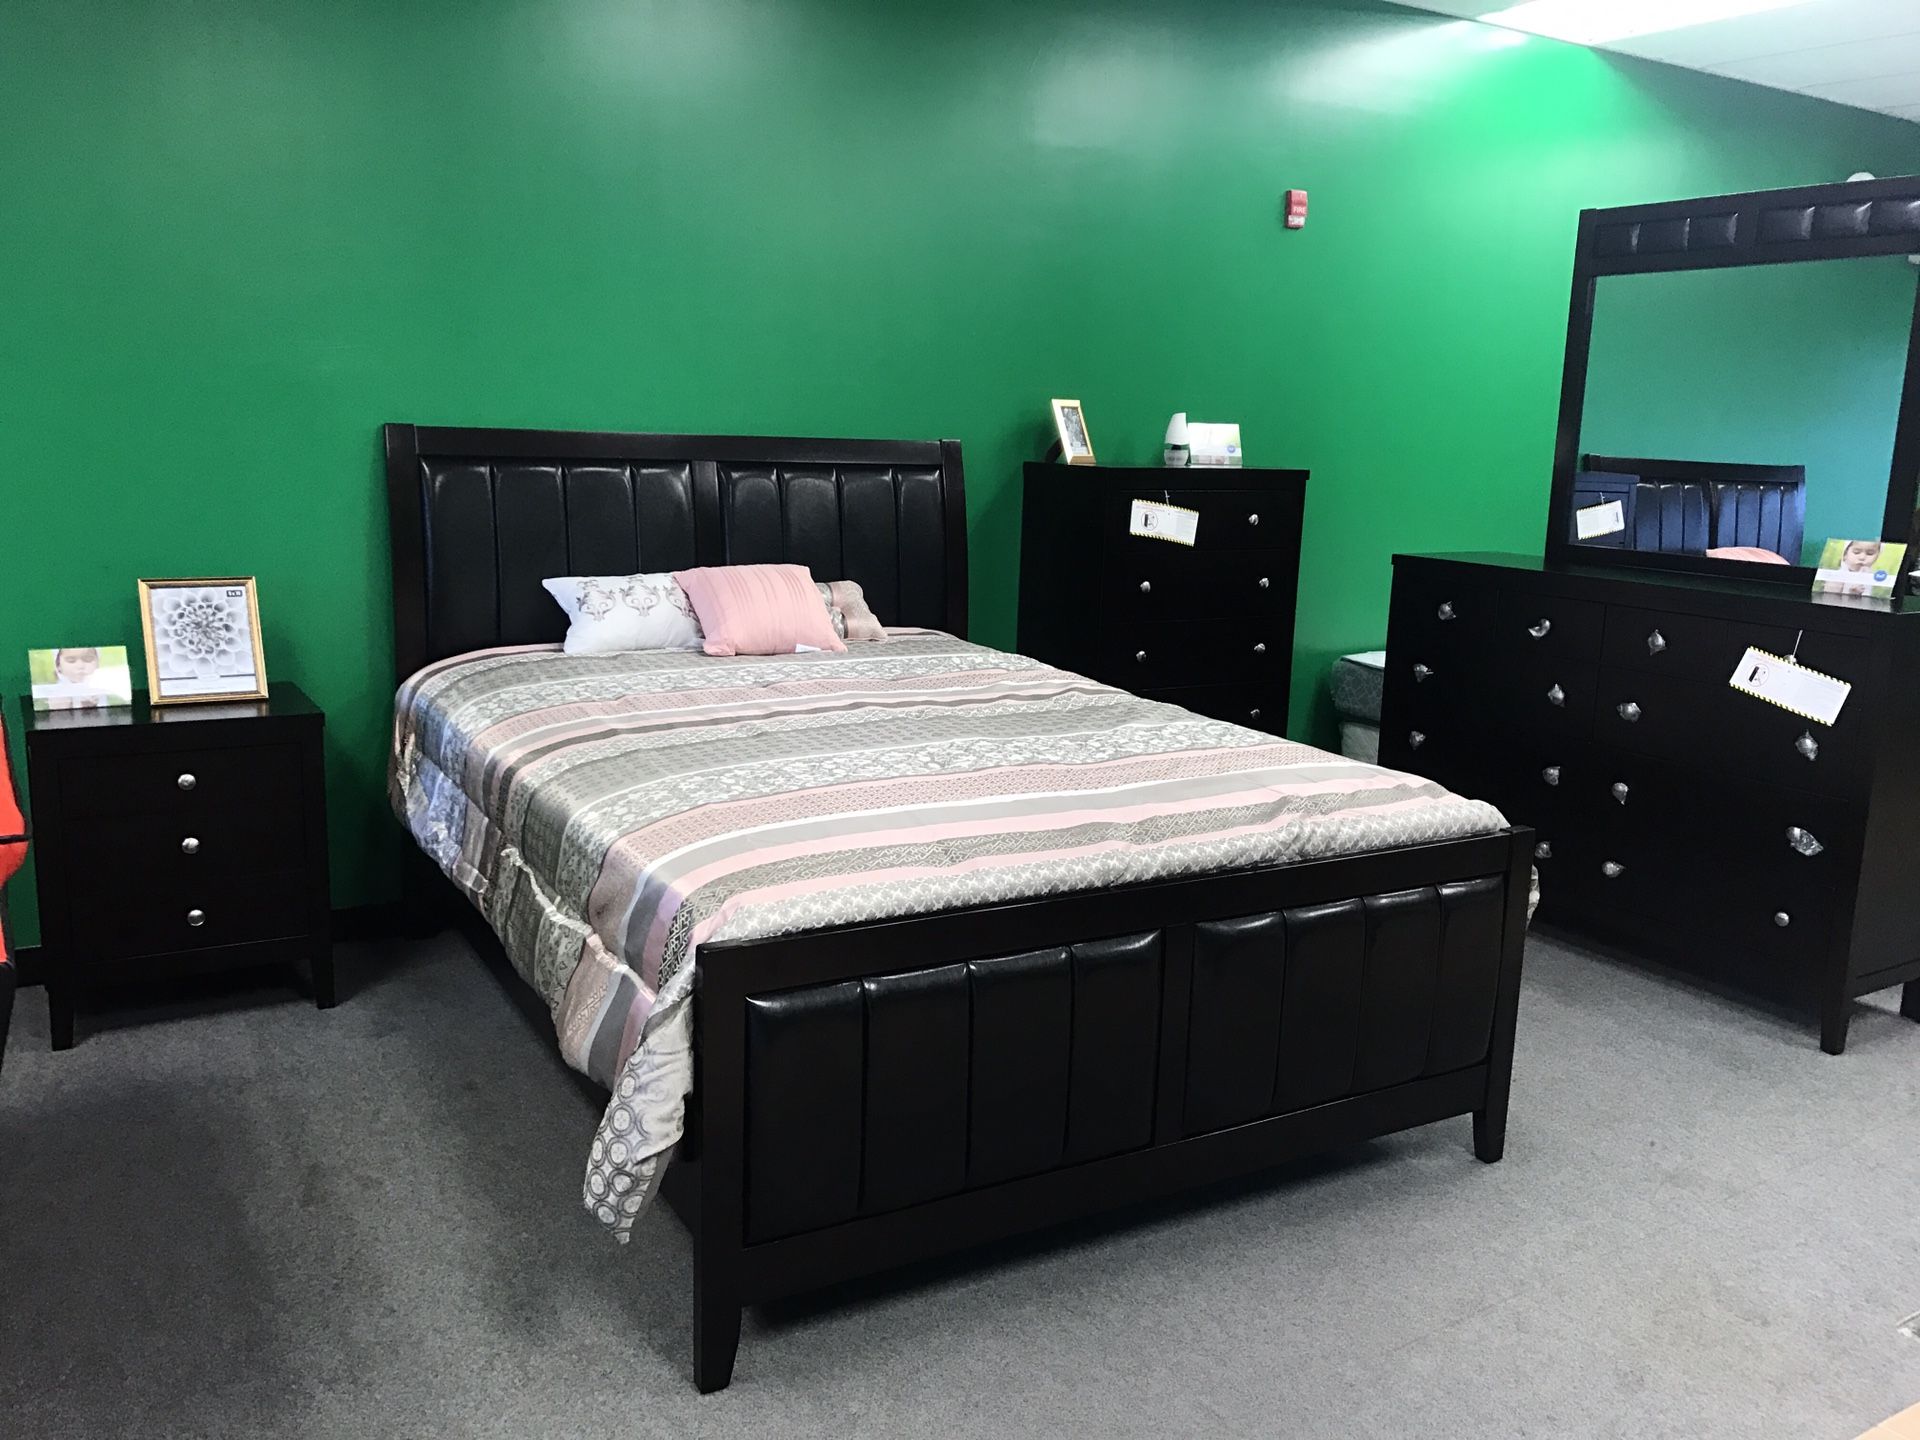 Brand new queen size bed bedroom set including 5 pieces included > Bedframe , Chest, Dresser, Mirror, 1 Night Stand